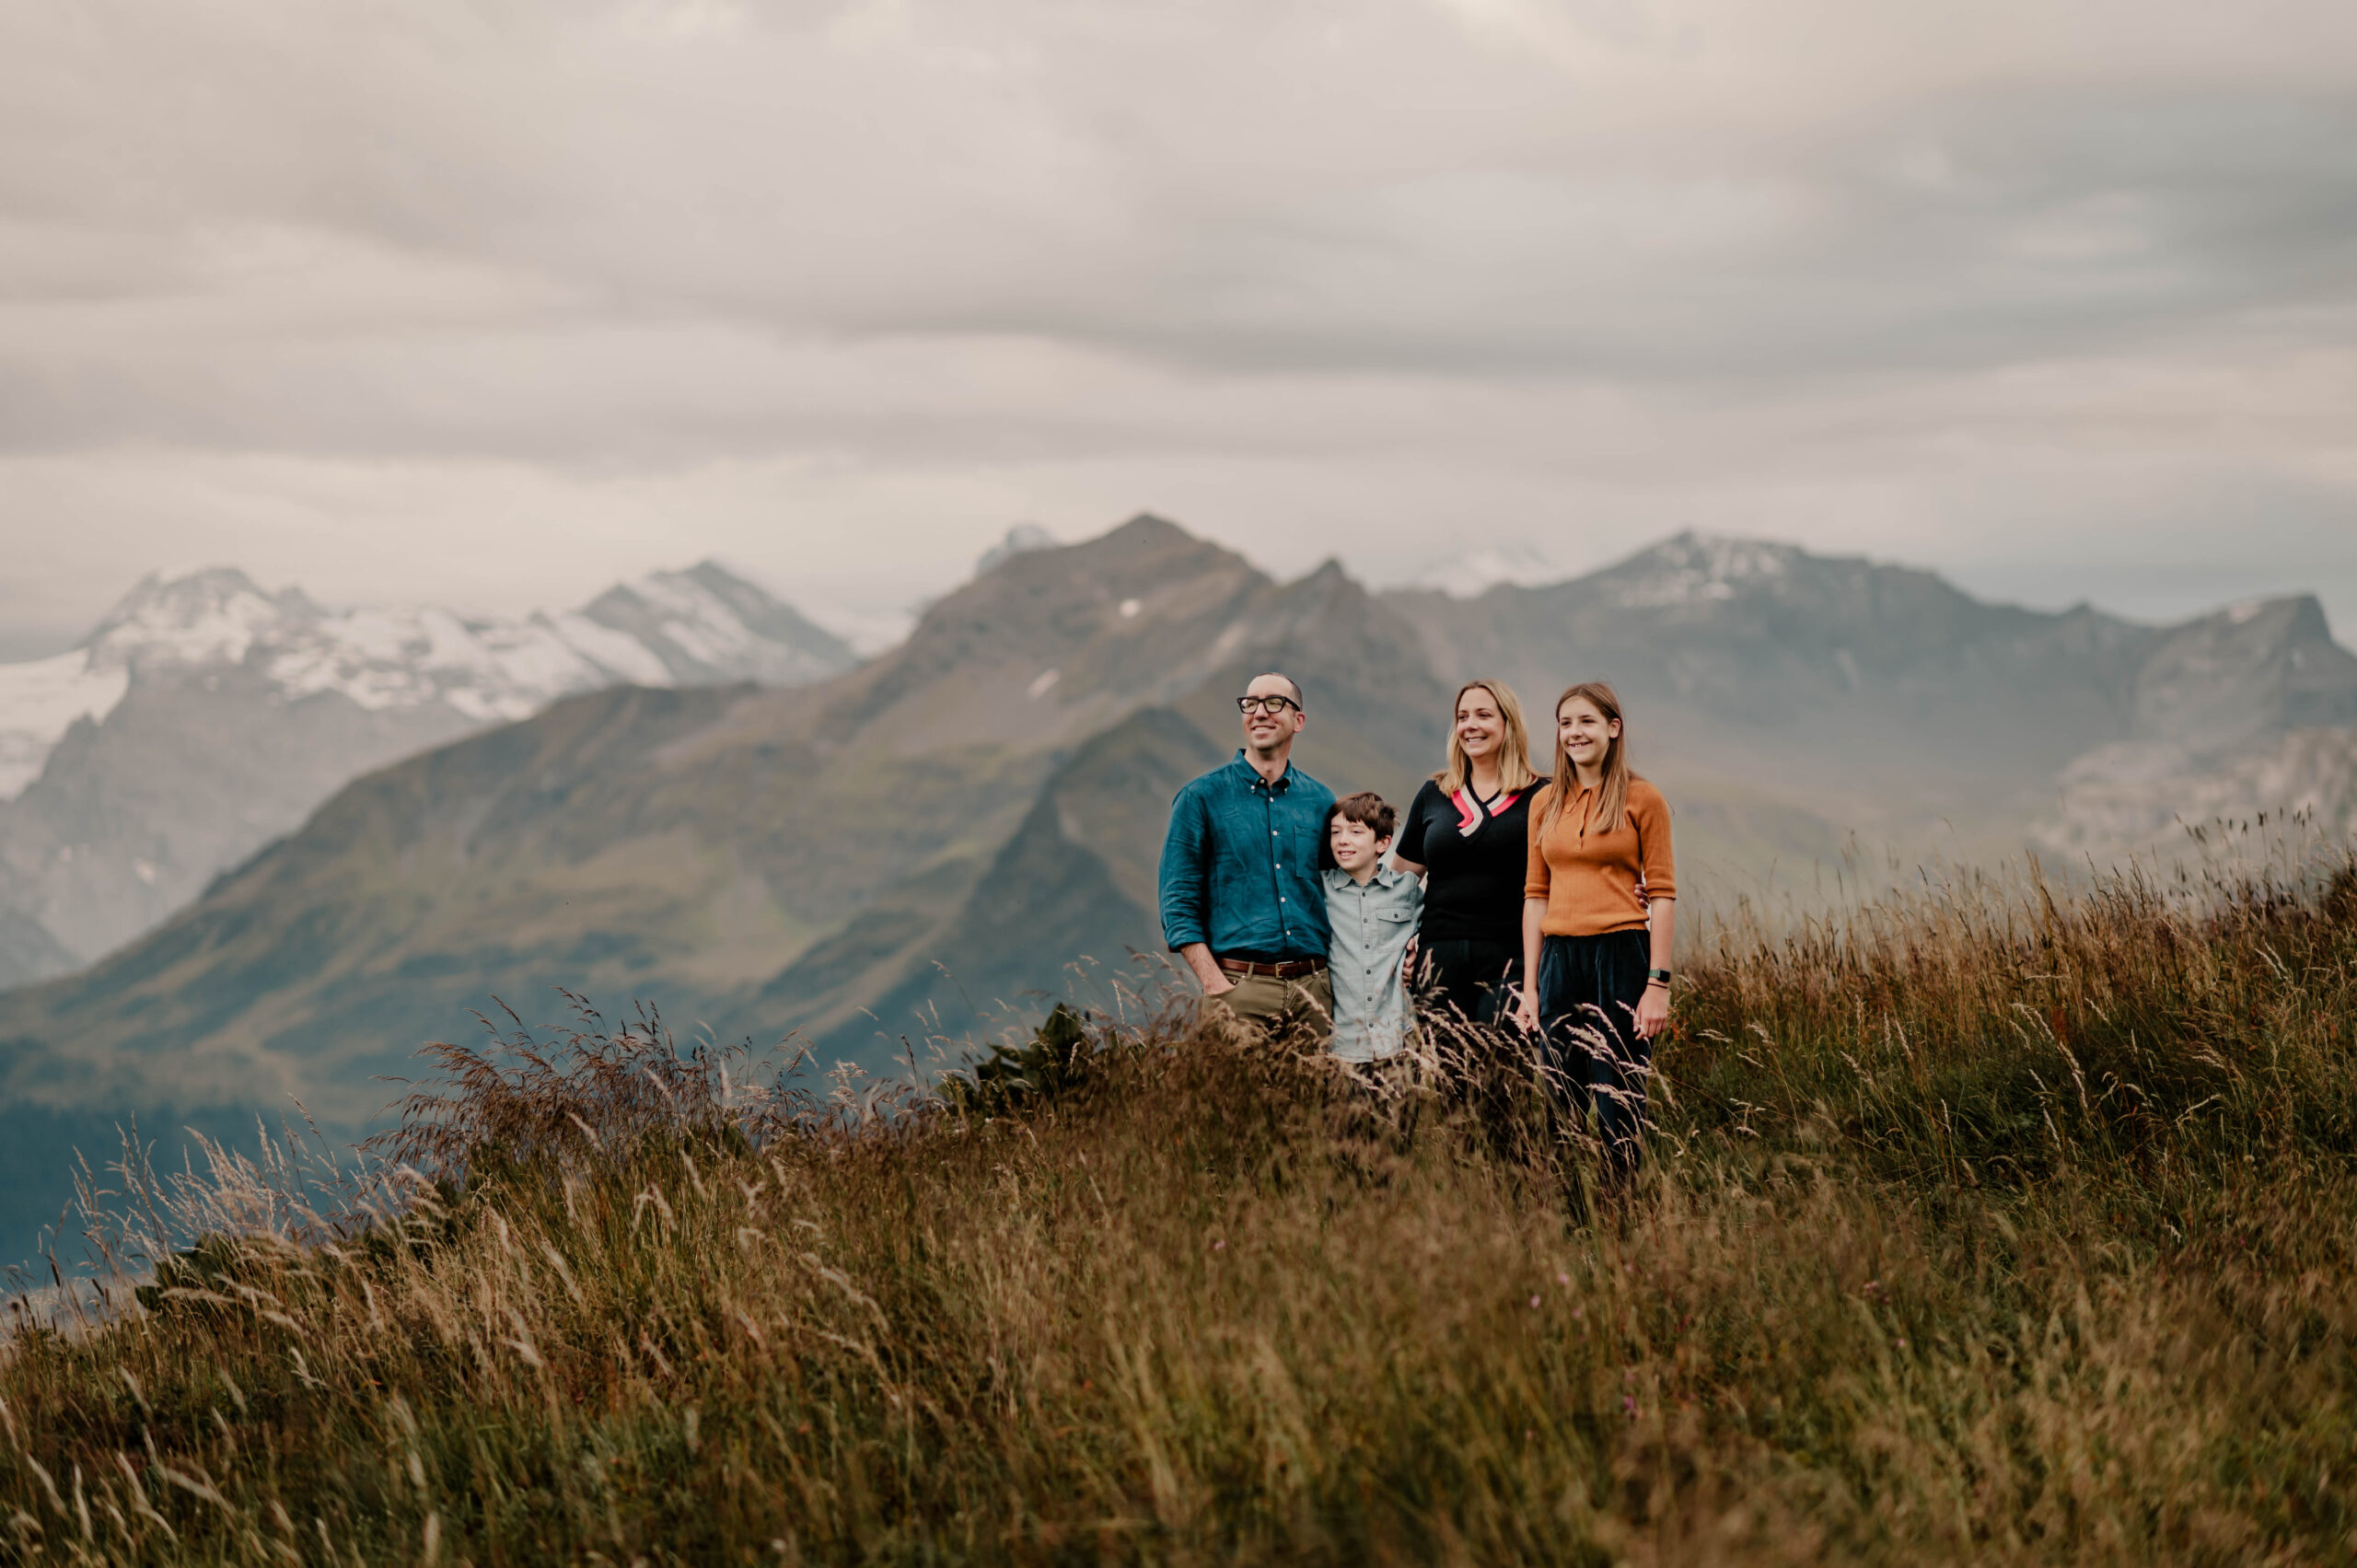 Sunset view over the Swiss Alps from Schynige Platte, showcasing the stunning Eiger, Mönch, and Jungfrau peaks, ideal for family photo sessions.